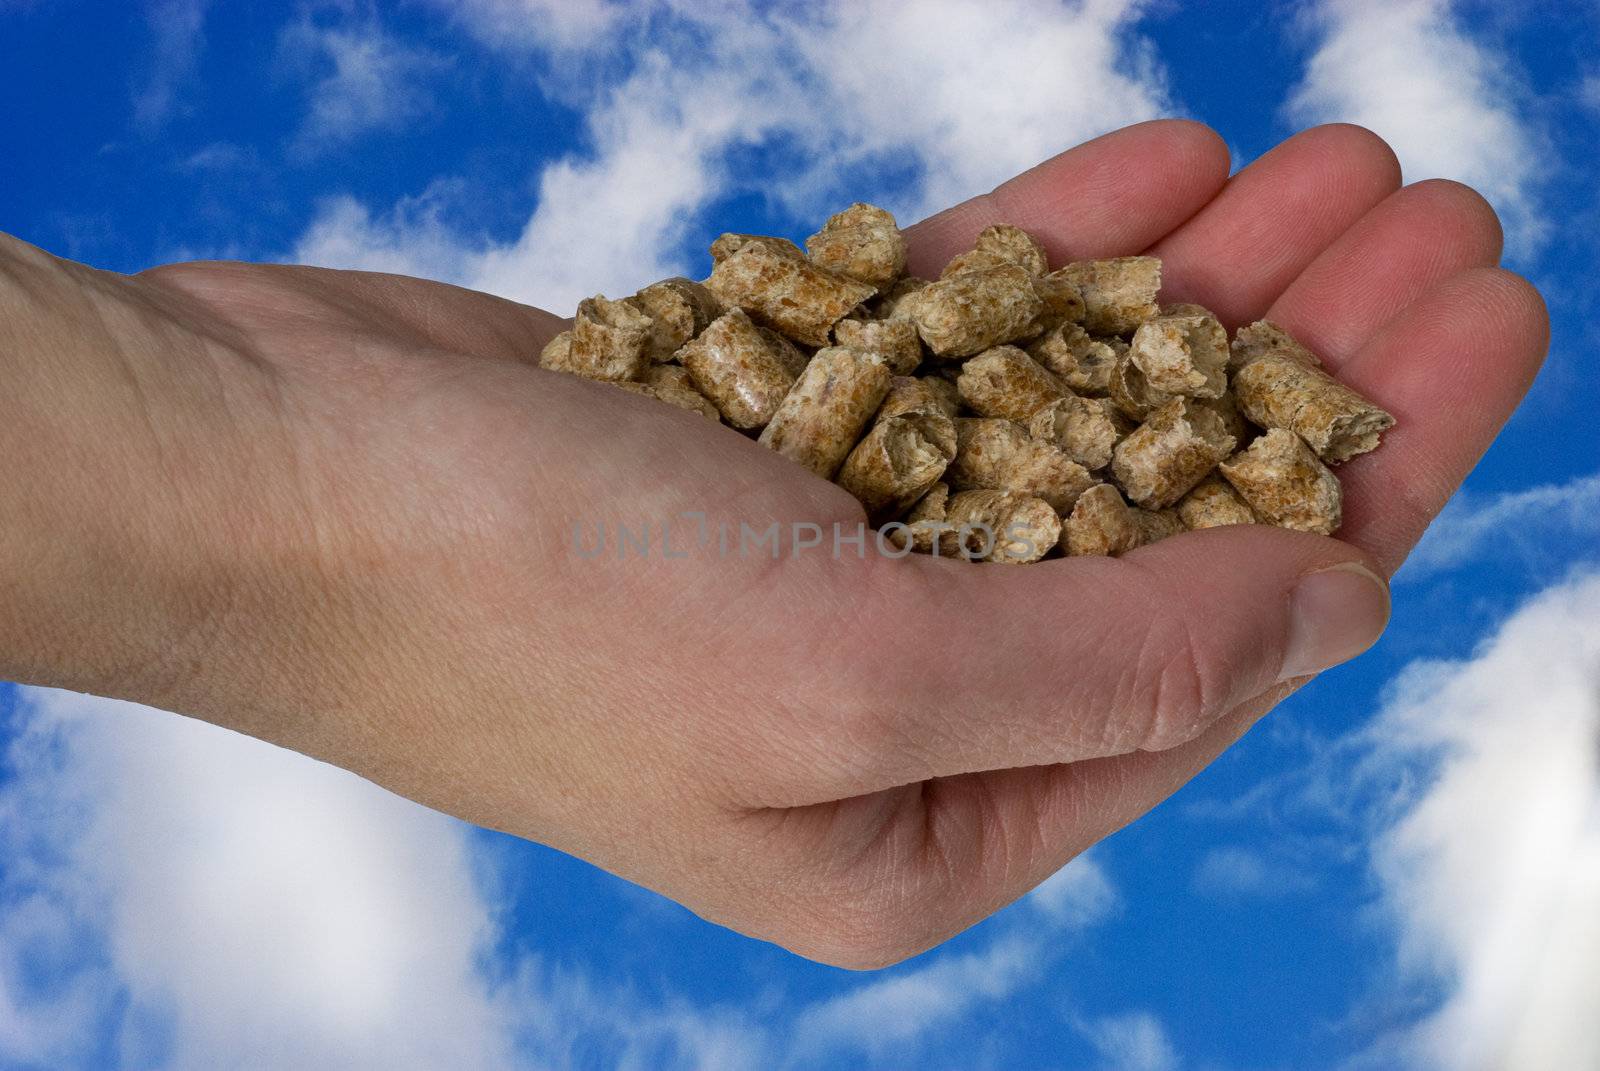 A hand holding pellets for heating, on a sky and clouds filled background.